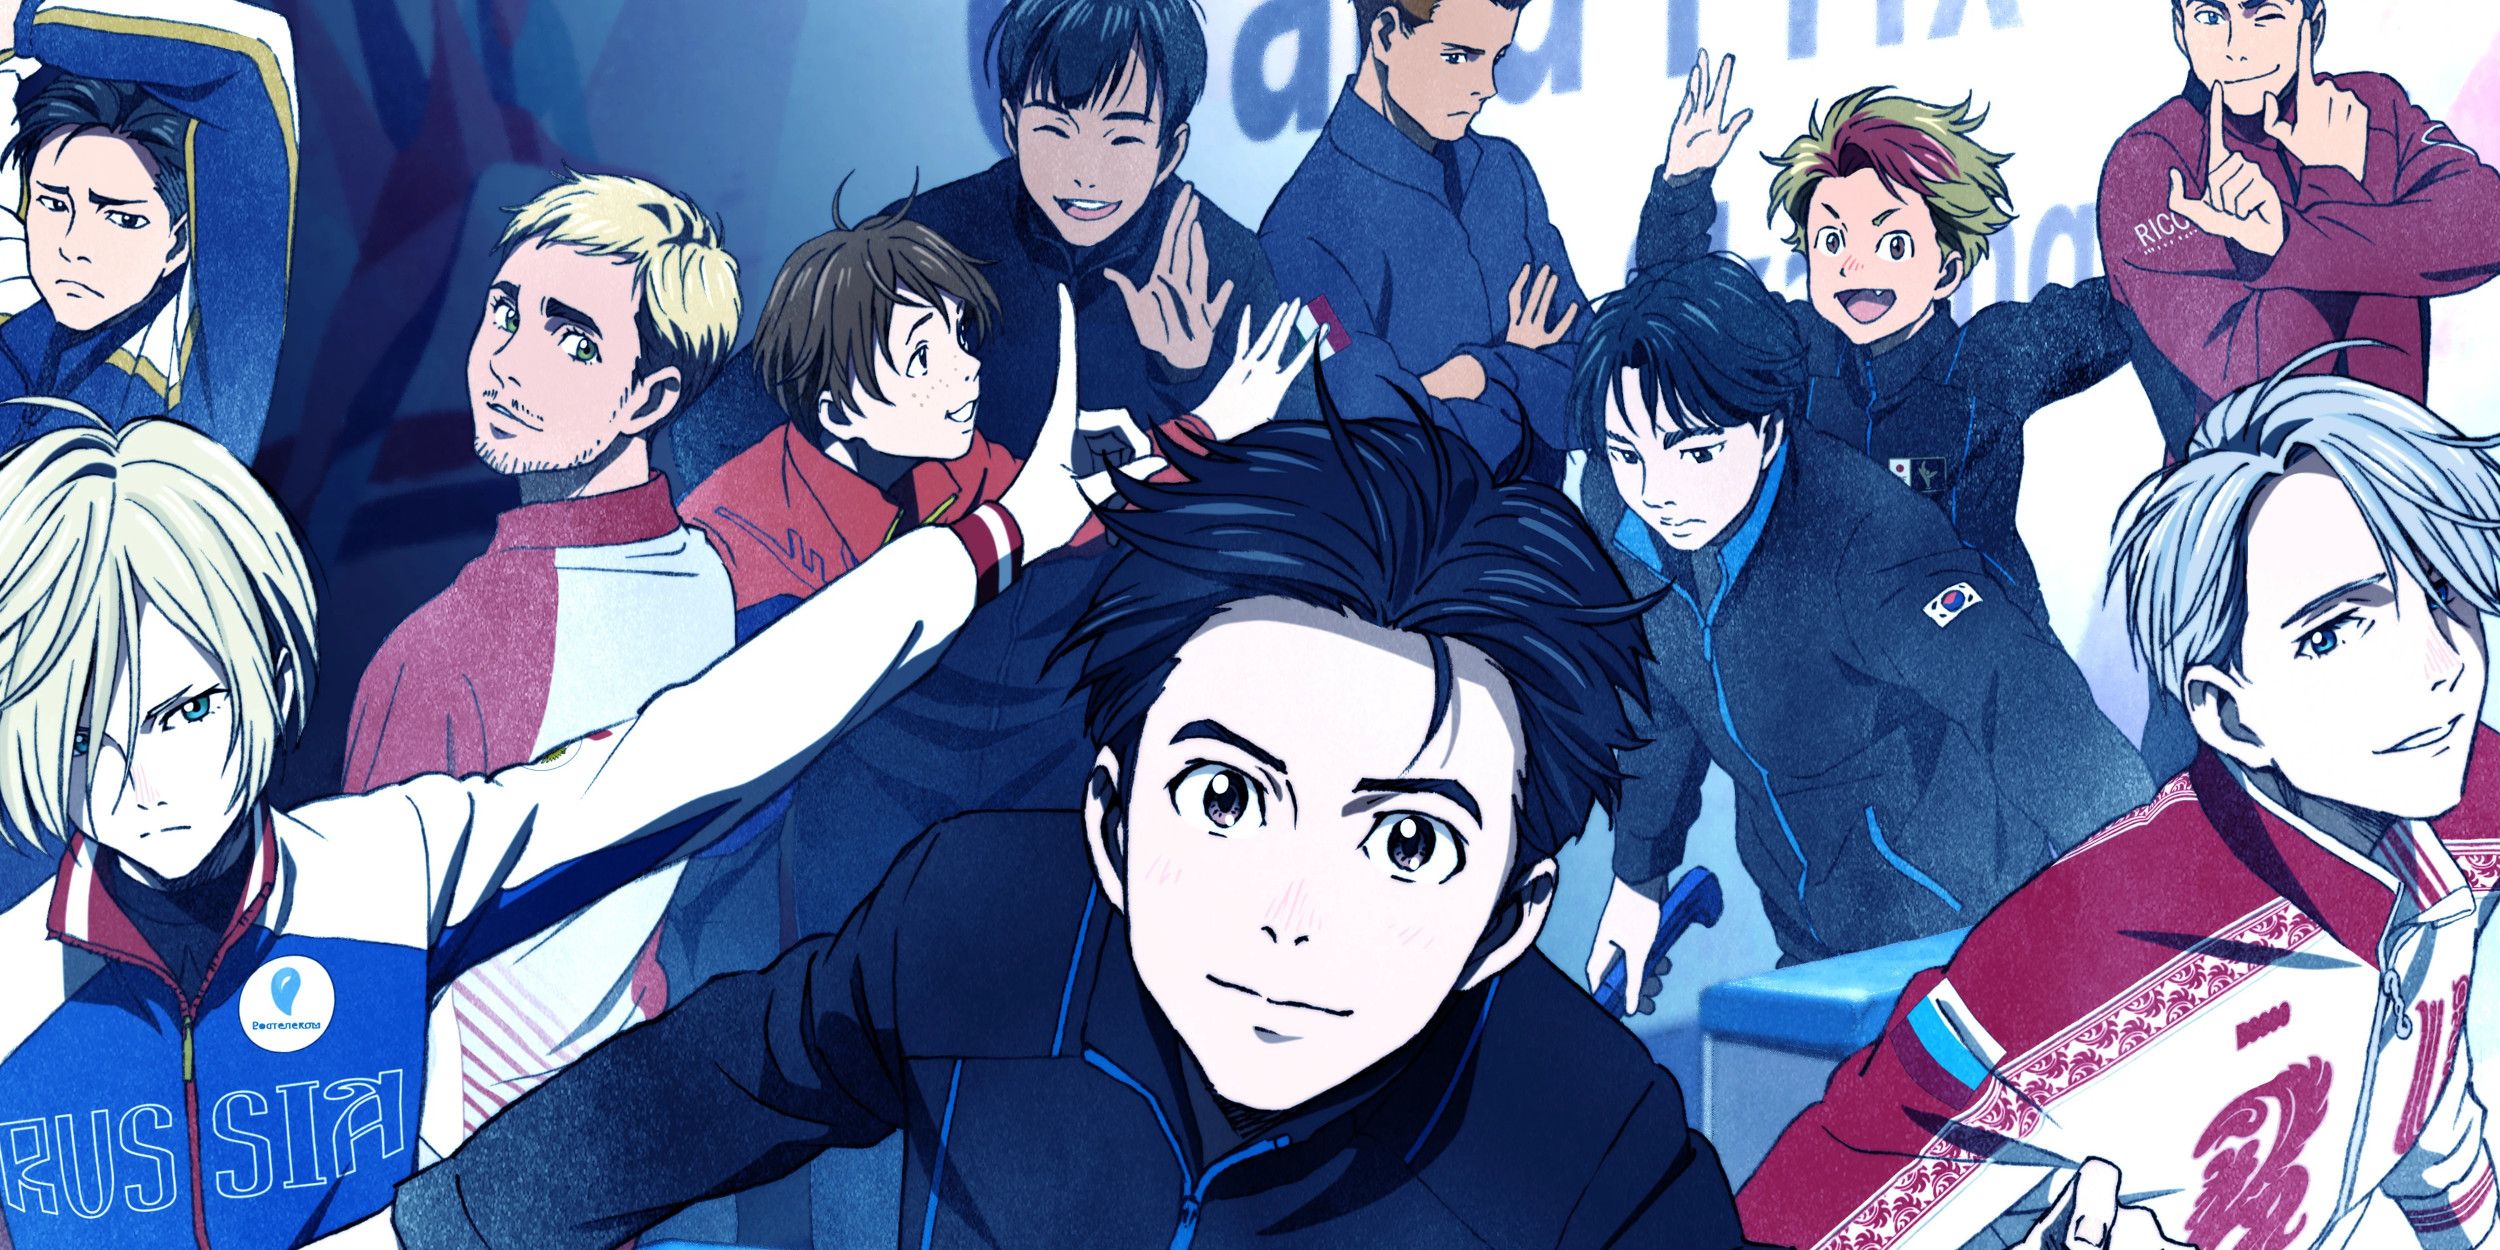 Promitional image for Yuri On Ice, showing most of the main cast